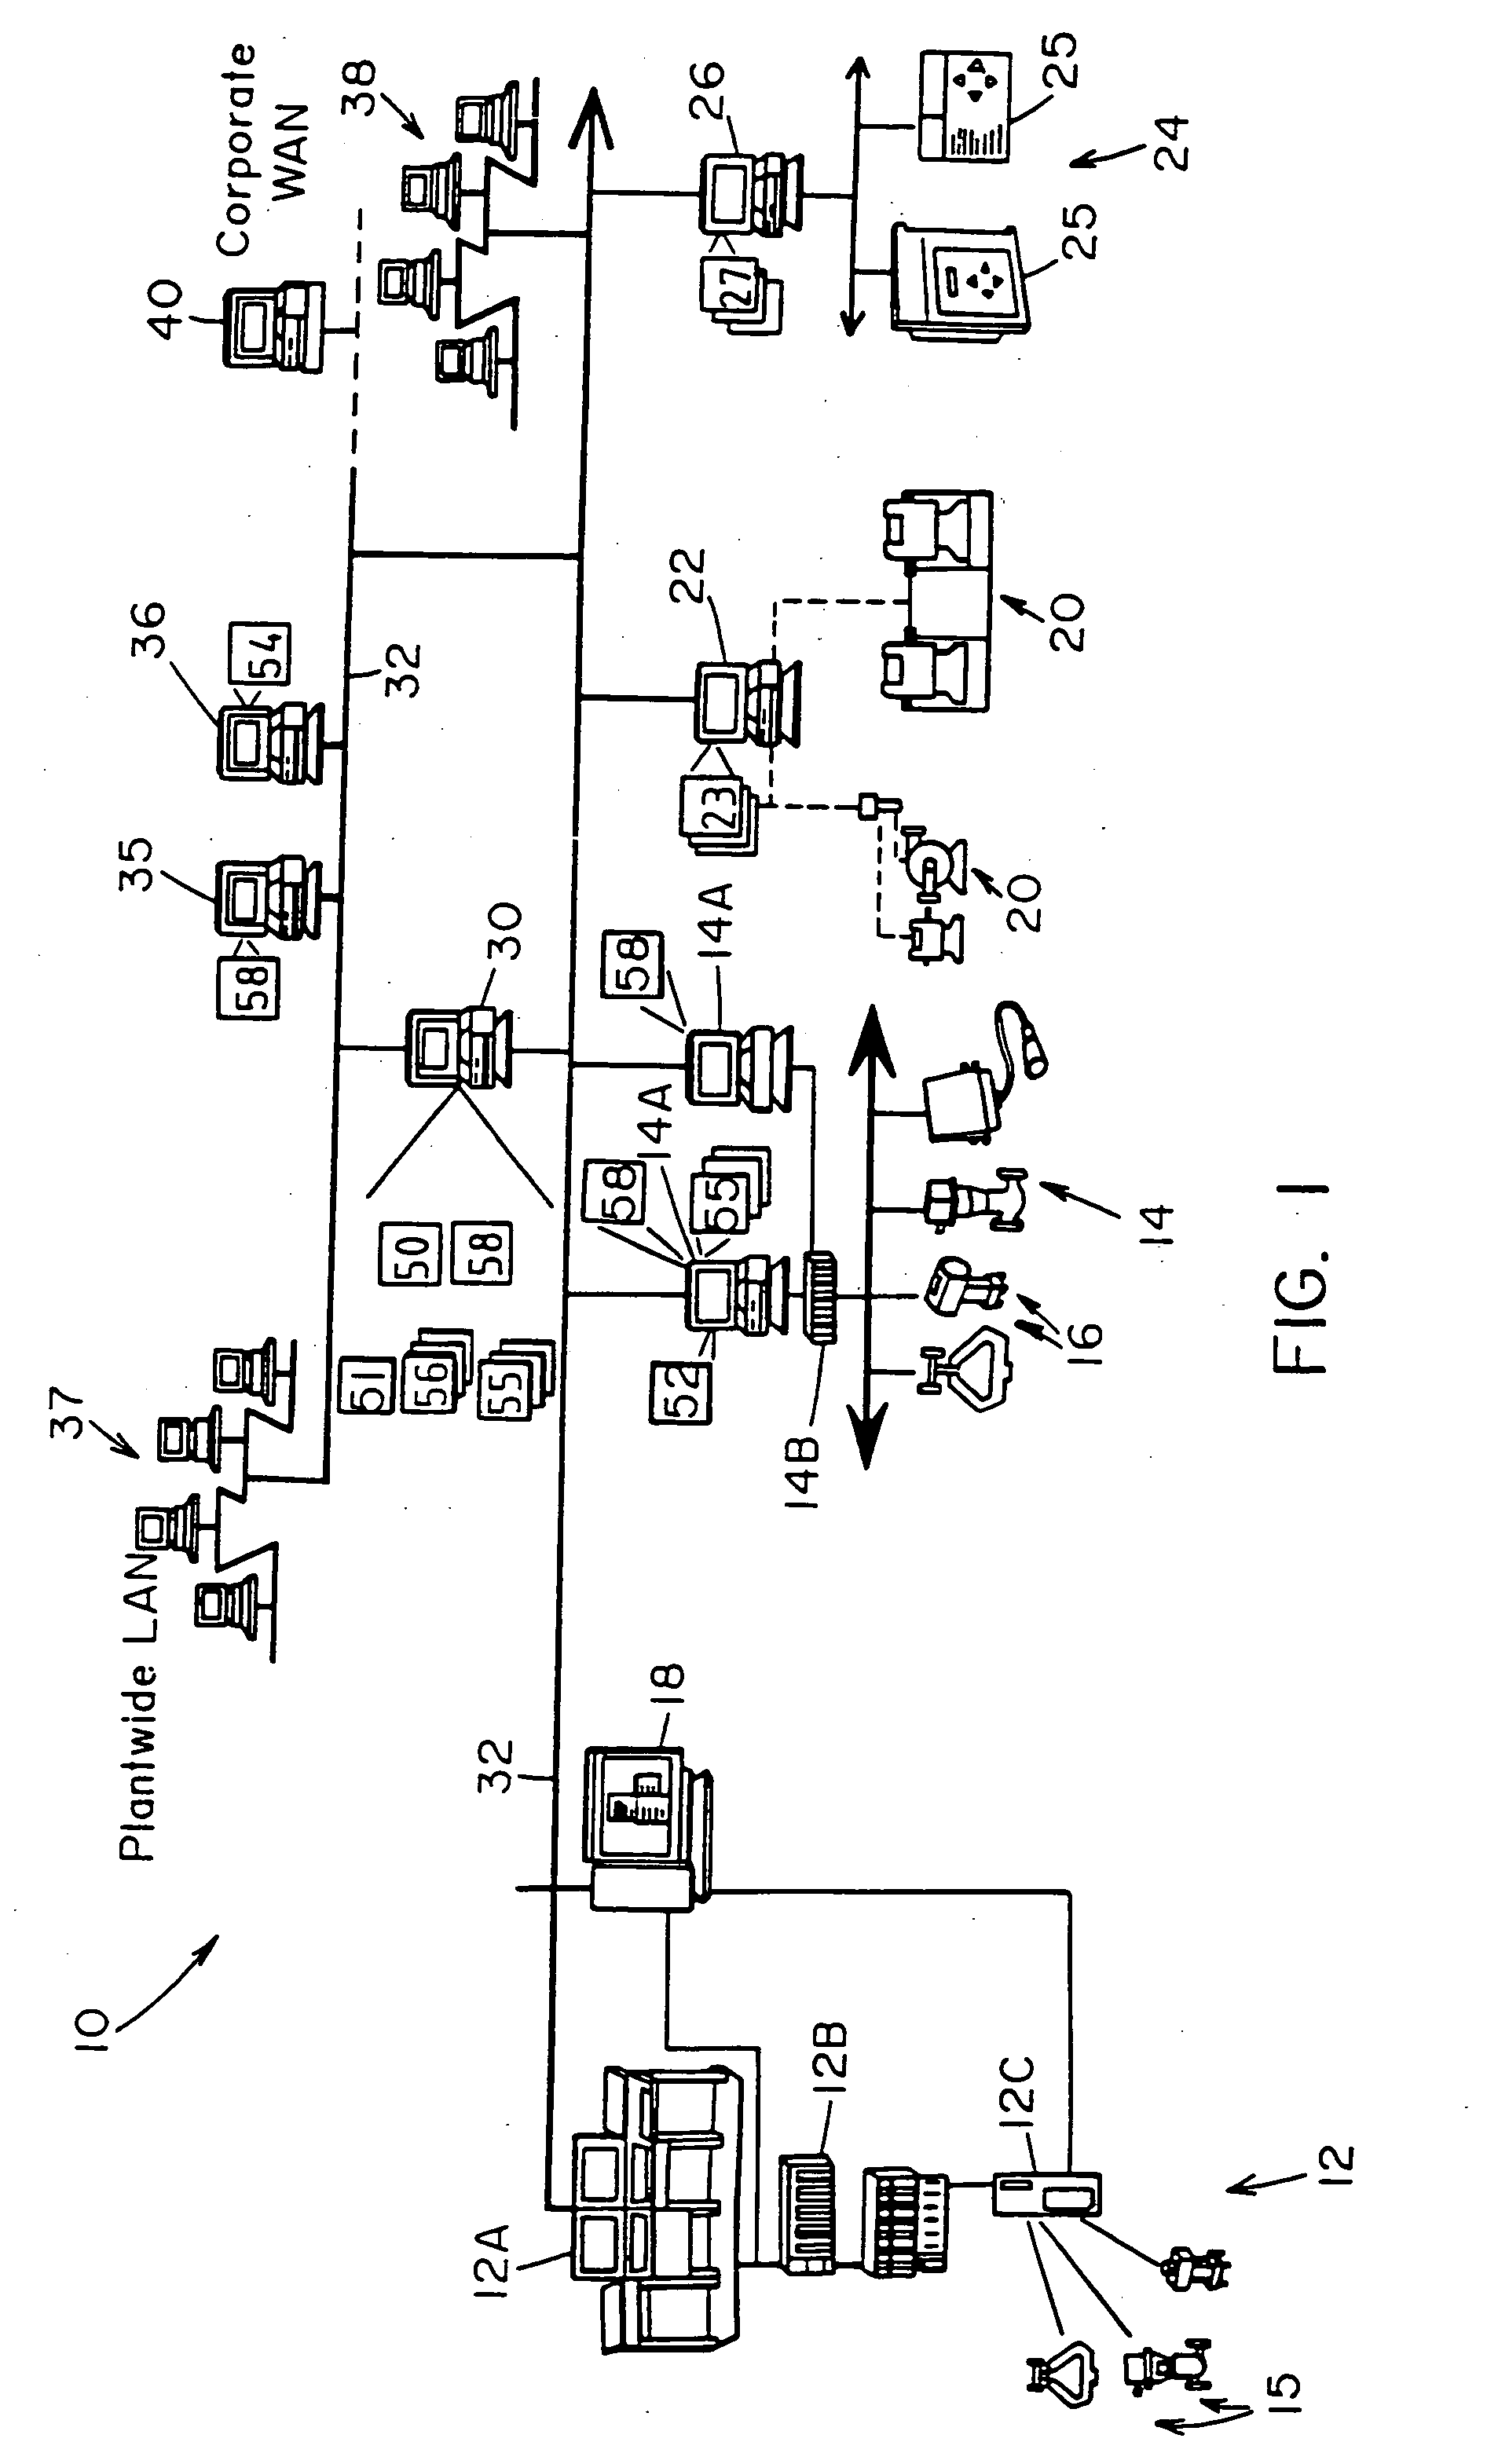 Creation and display of indices within a process plant